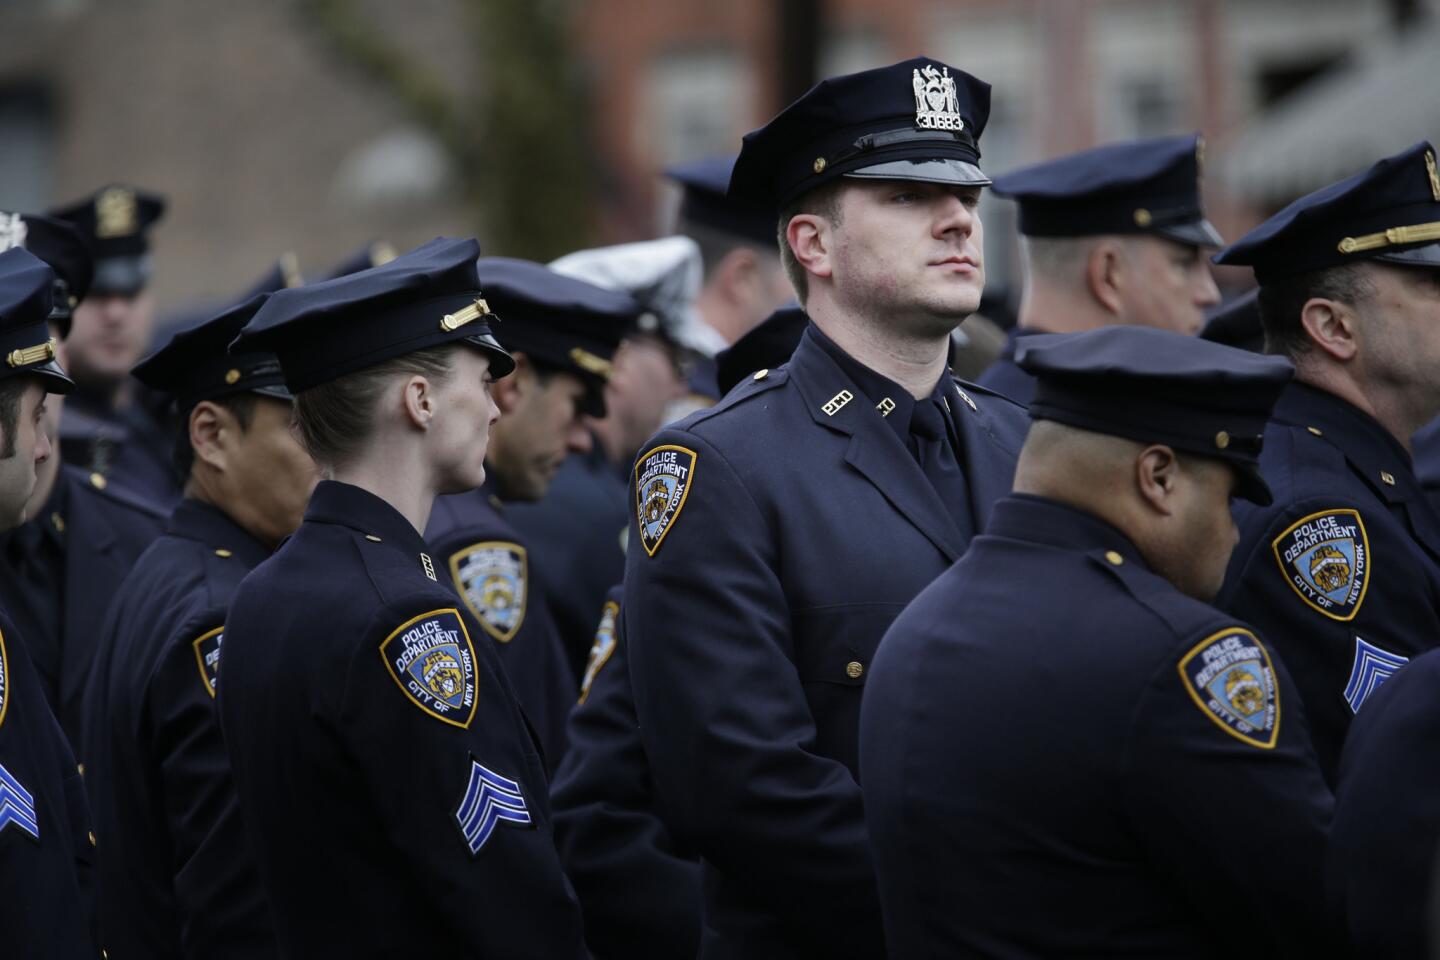 A police officer turns his back to a large screen where New York City Mayor Bill de Blasio speaks during the funeral of Officer Wenjian Liu in New York on Jan. 4.